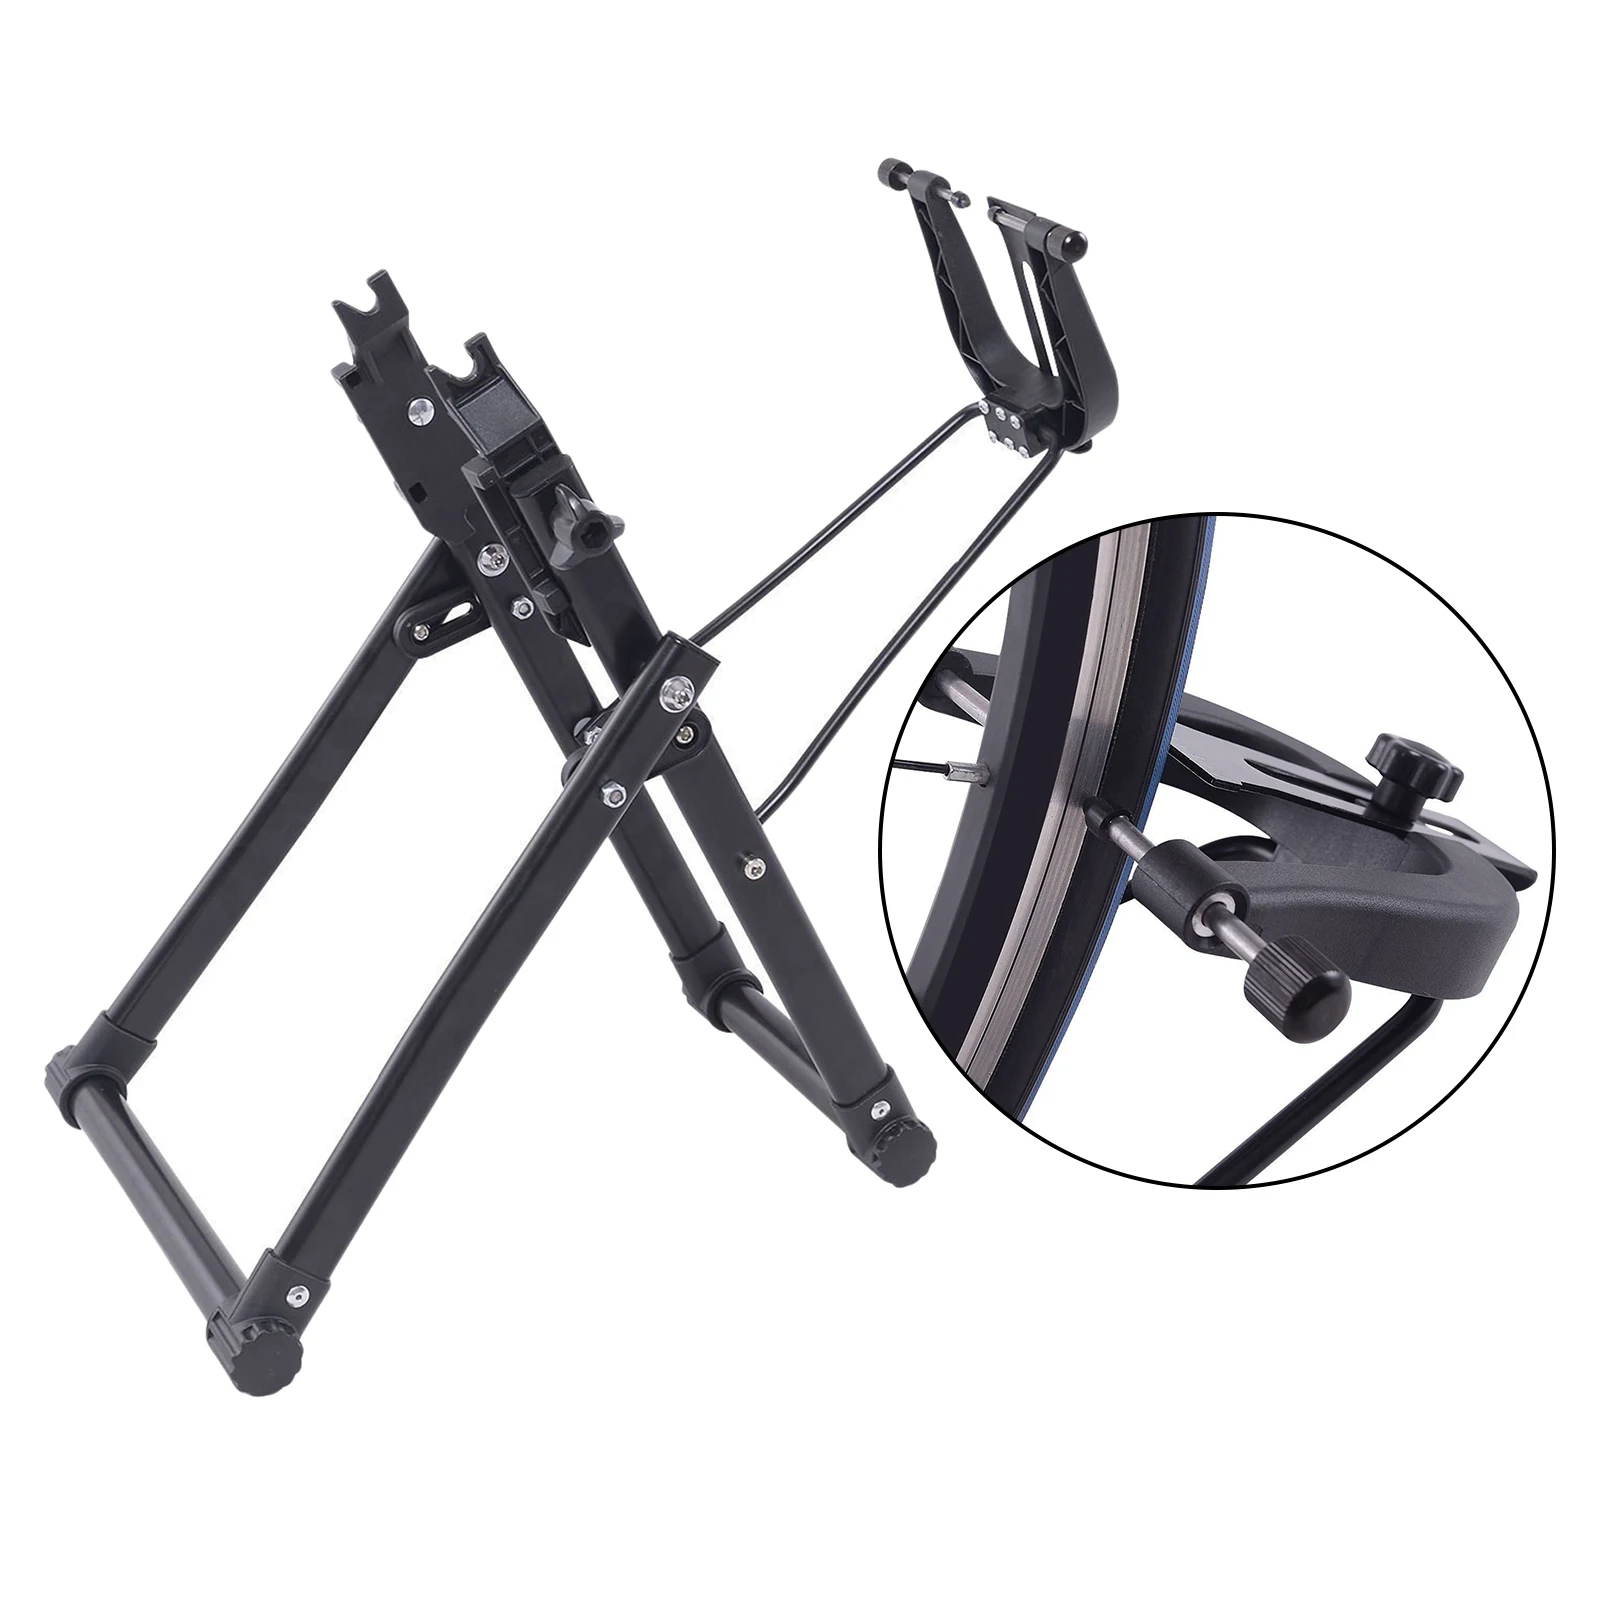 Bike Wheel Truing Stand Tire Truing Stand Holder Support Mountain Road Bike Adjustable Maintenance Tool for 16 - 29 inch Bike